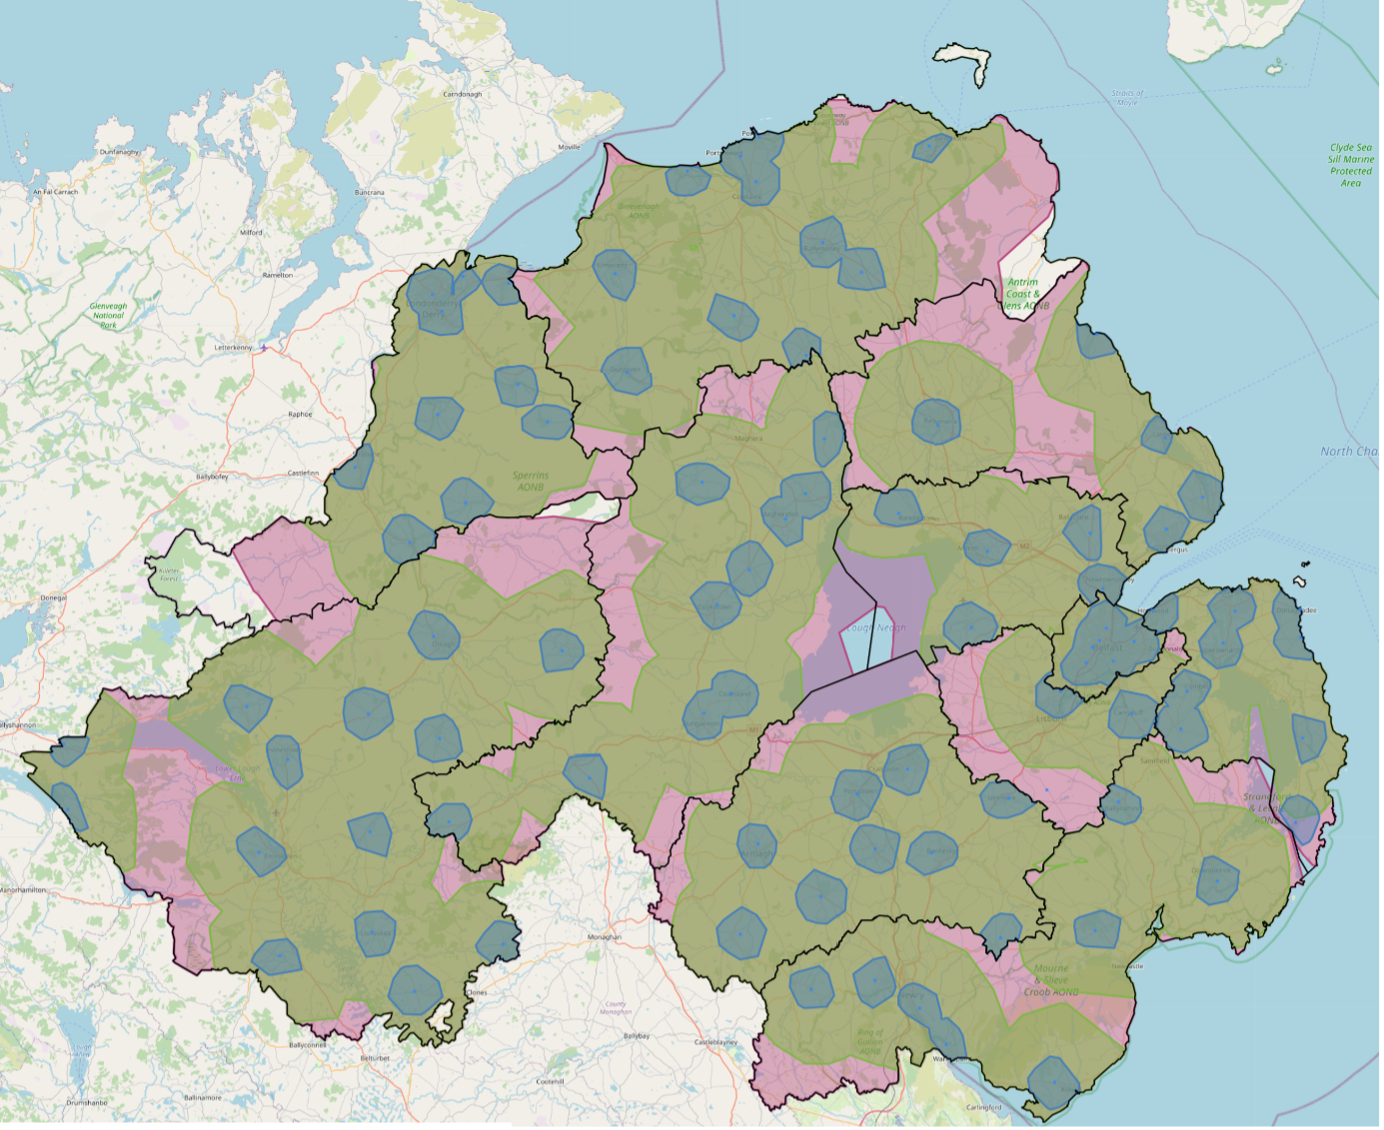 A map of recycling sites in Northern Ireland showing drive times to each site